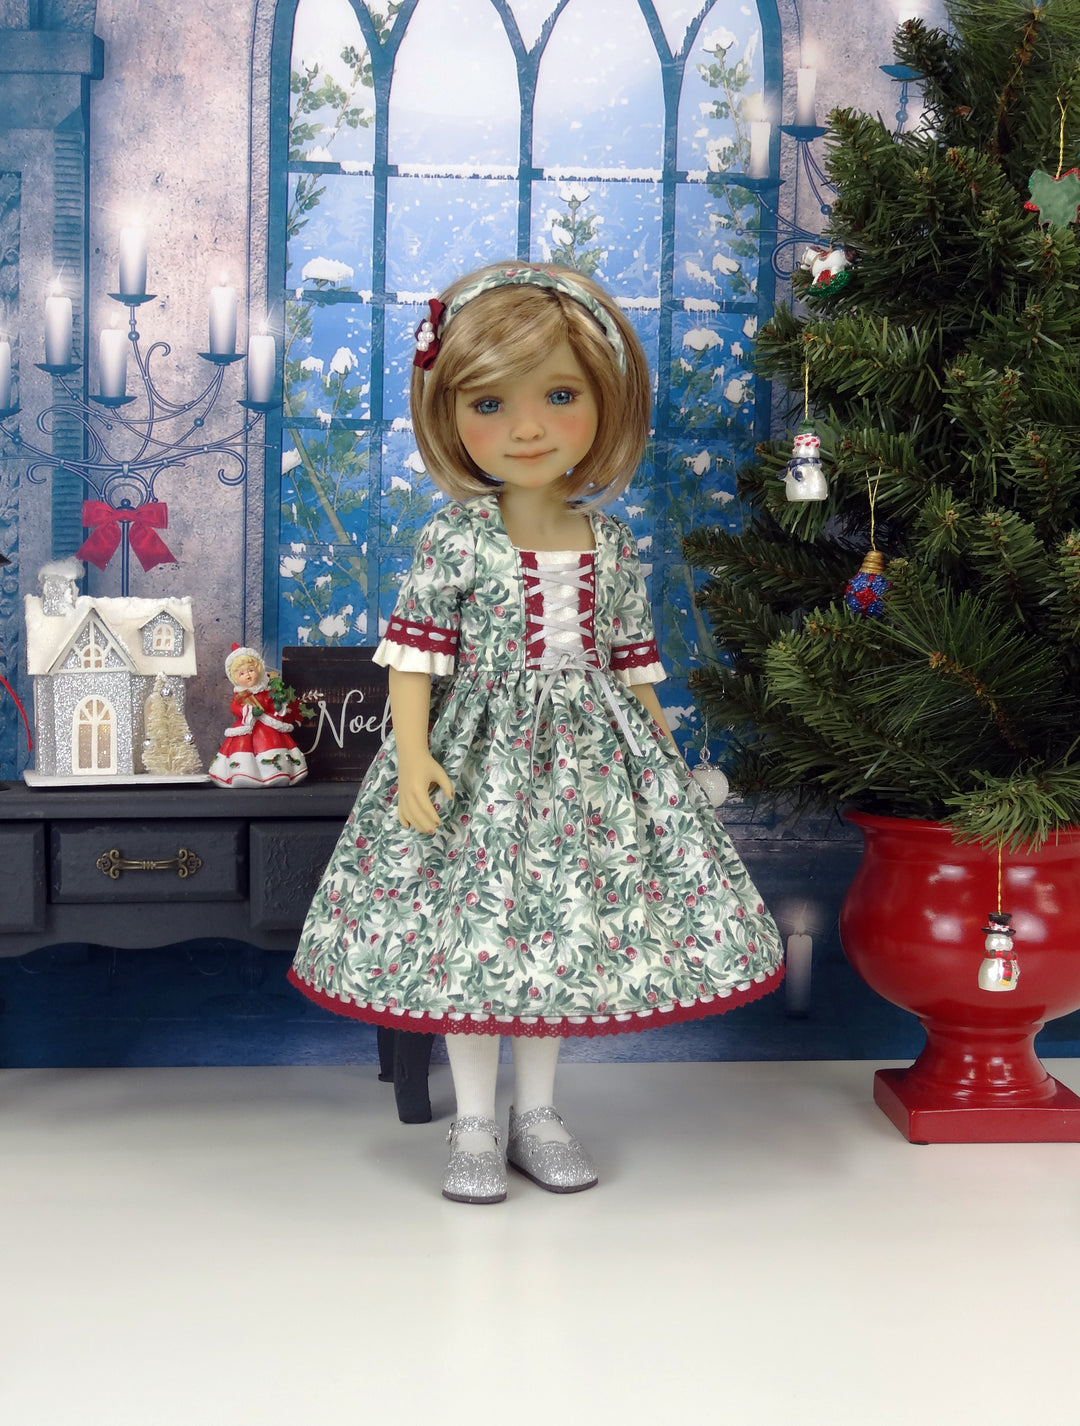 Icy Berries - dress ensemble with shoes for Ruby Red Fashion Friends doll